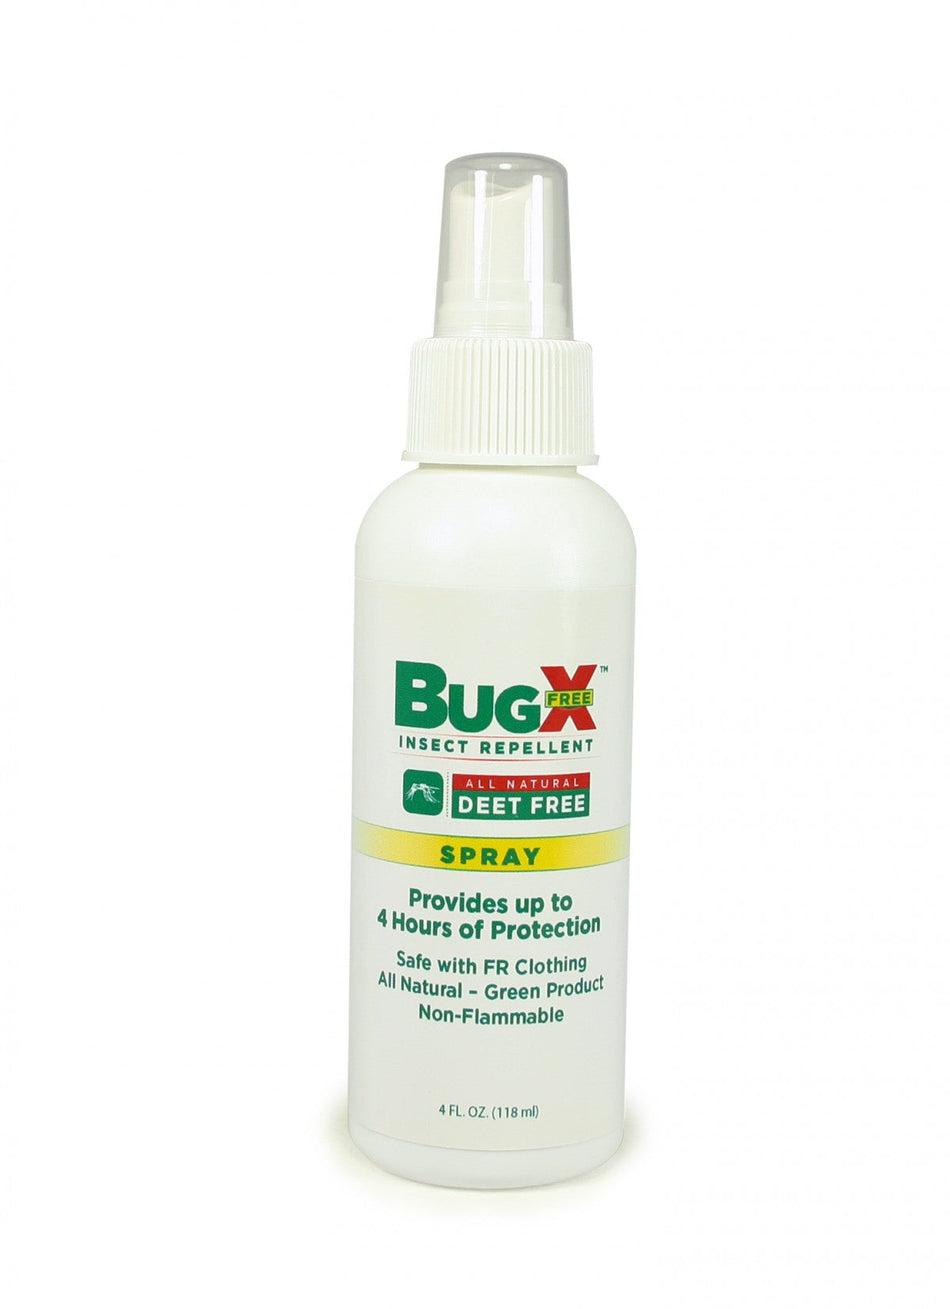 18-804 First Aid Only BugX DEET FREE Insect Repellent Spray, 4 oz. Bottle - Sold per Each